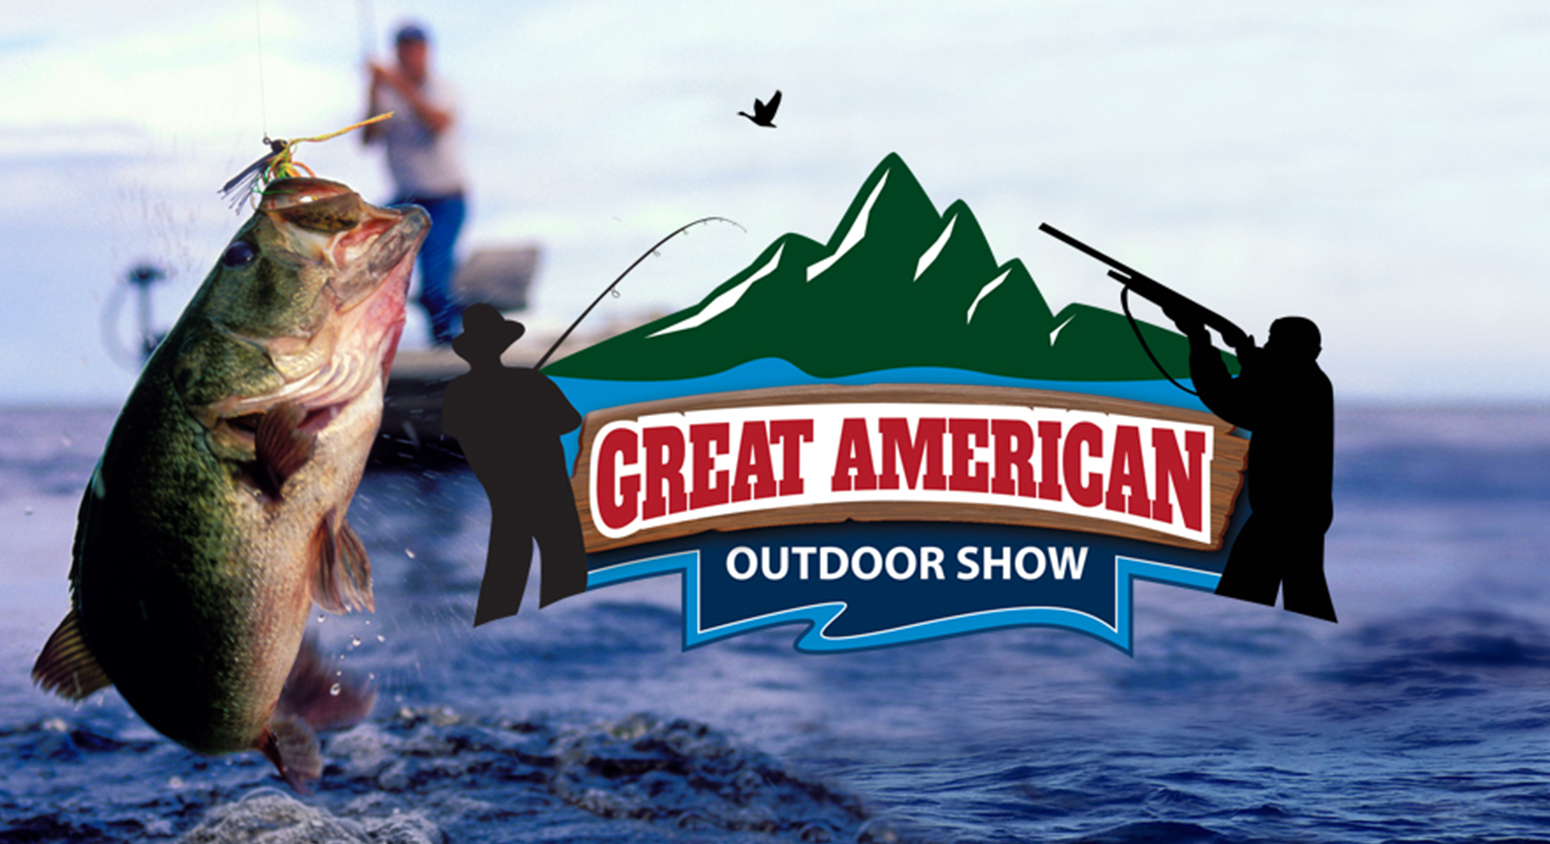 9 Reasons You Should Attend the Great American Outdoor Show